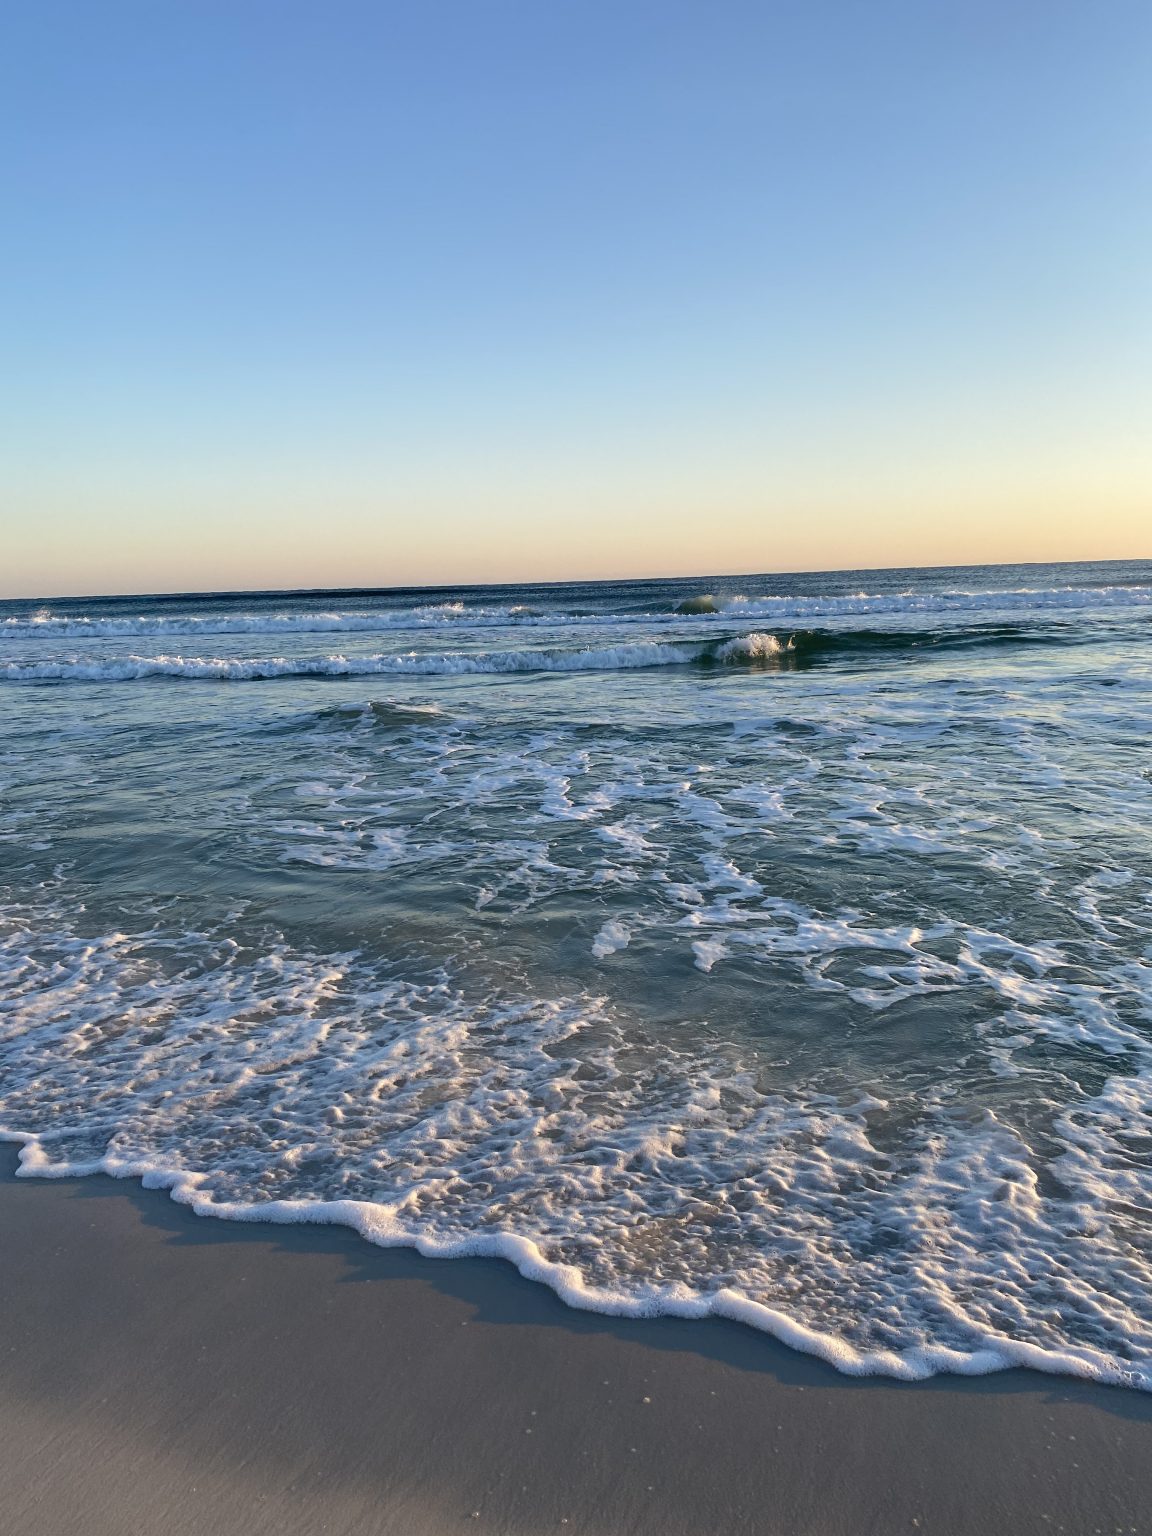 6 Reasons To Visit Destin, Florida This Fall Old 98 Destin and 30A